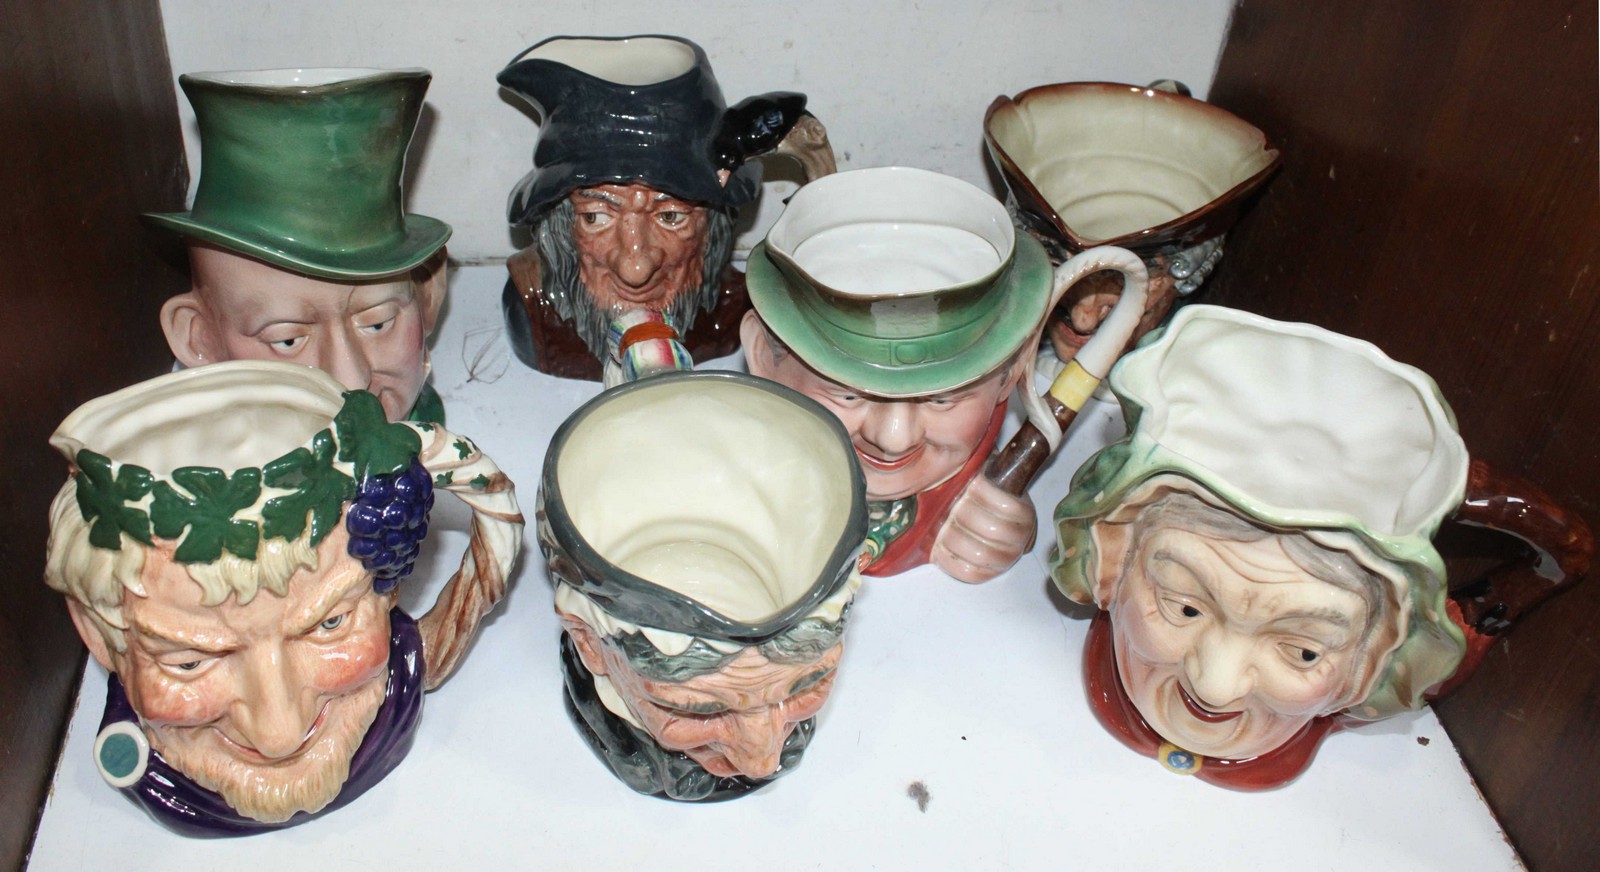 SECTION 8. Three large Beswick character jugs including 'Sairey Gamp' No.371, 'Tony Weller' No.